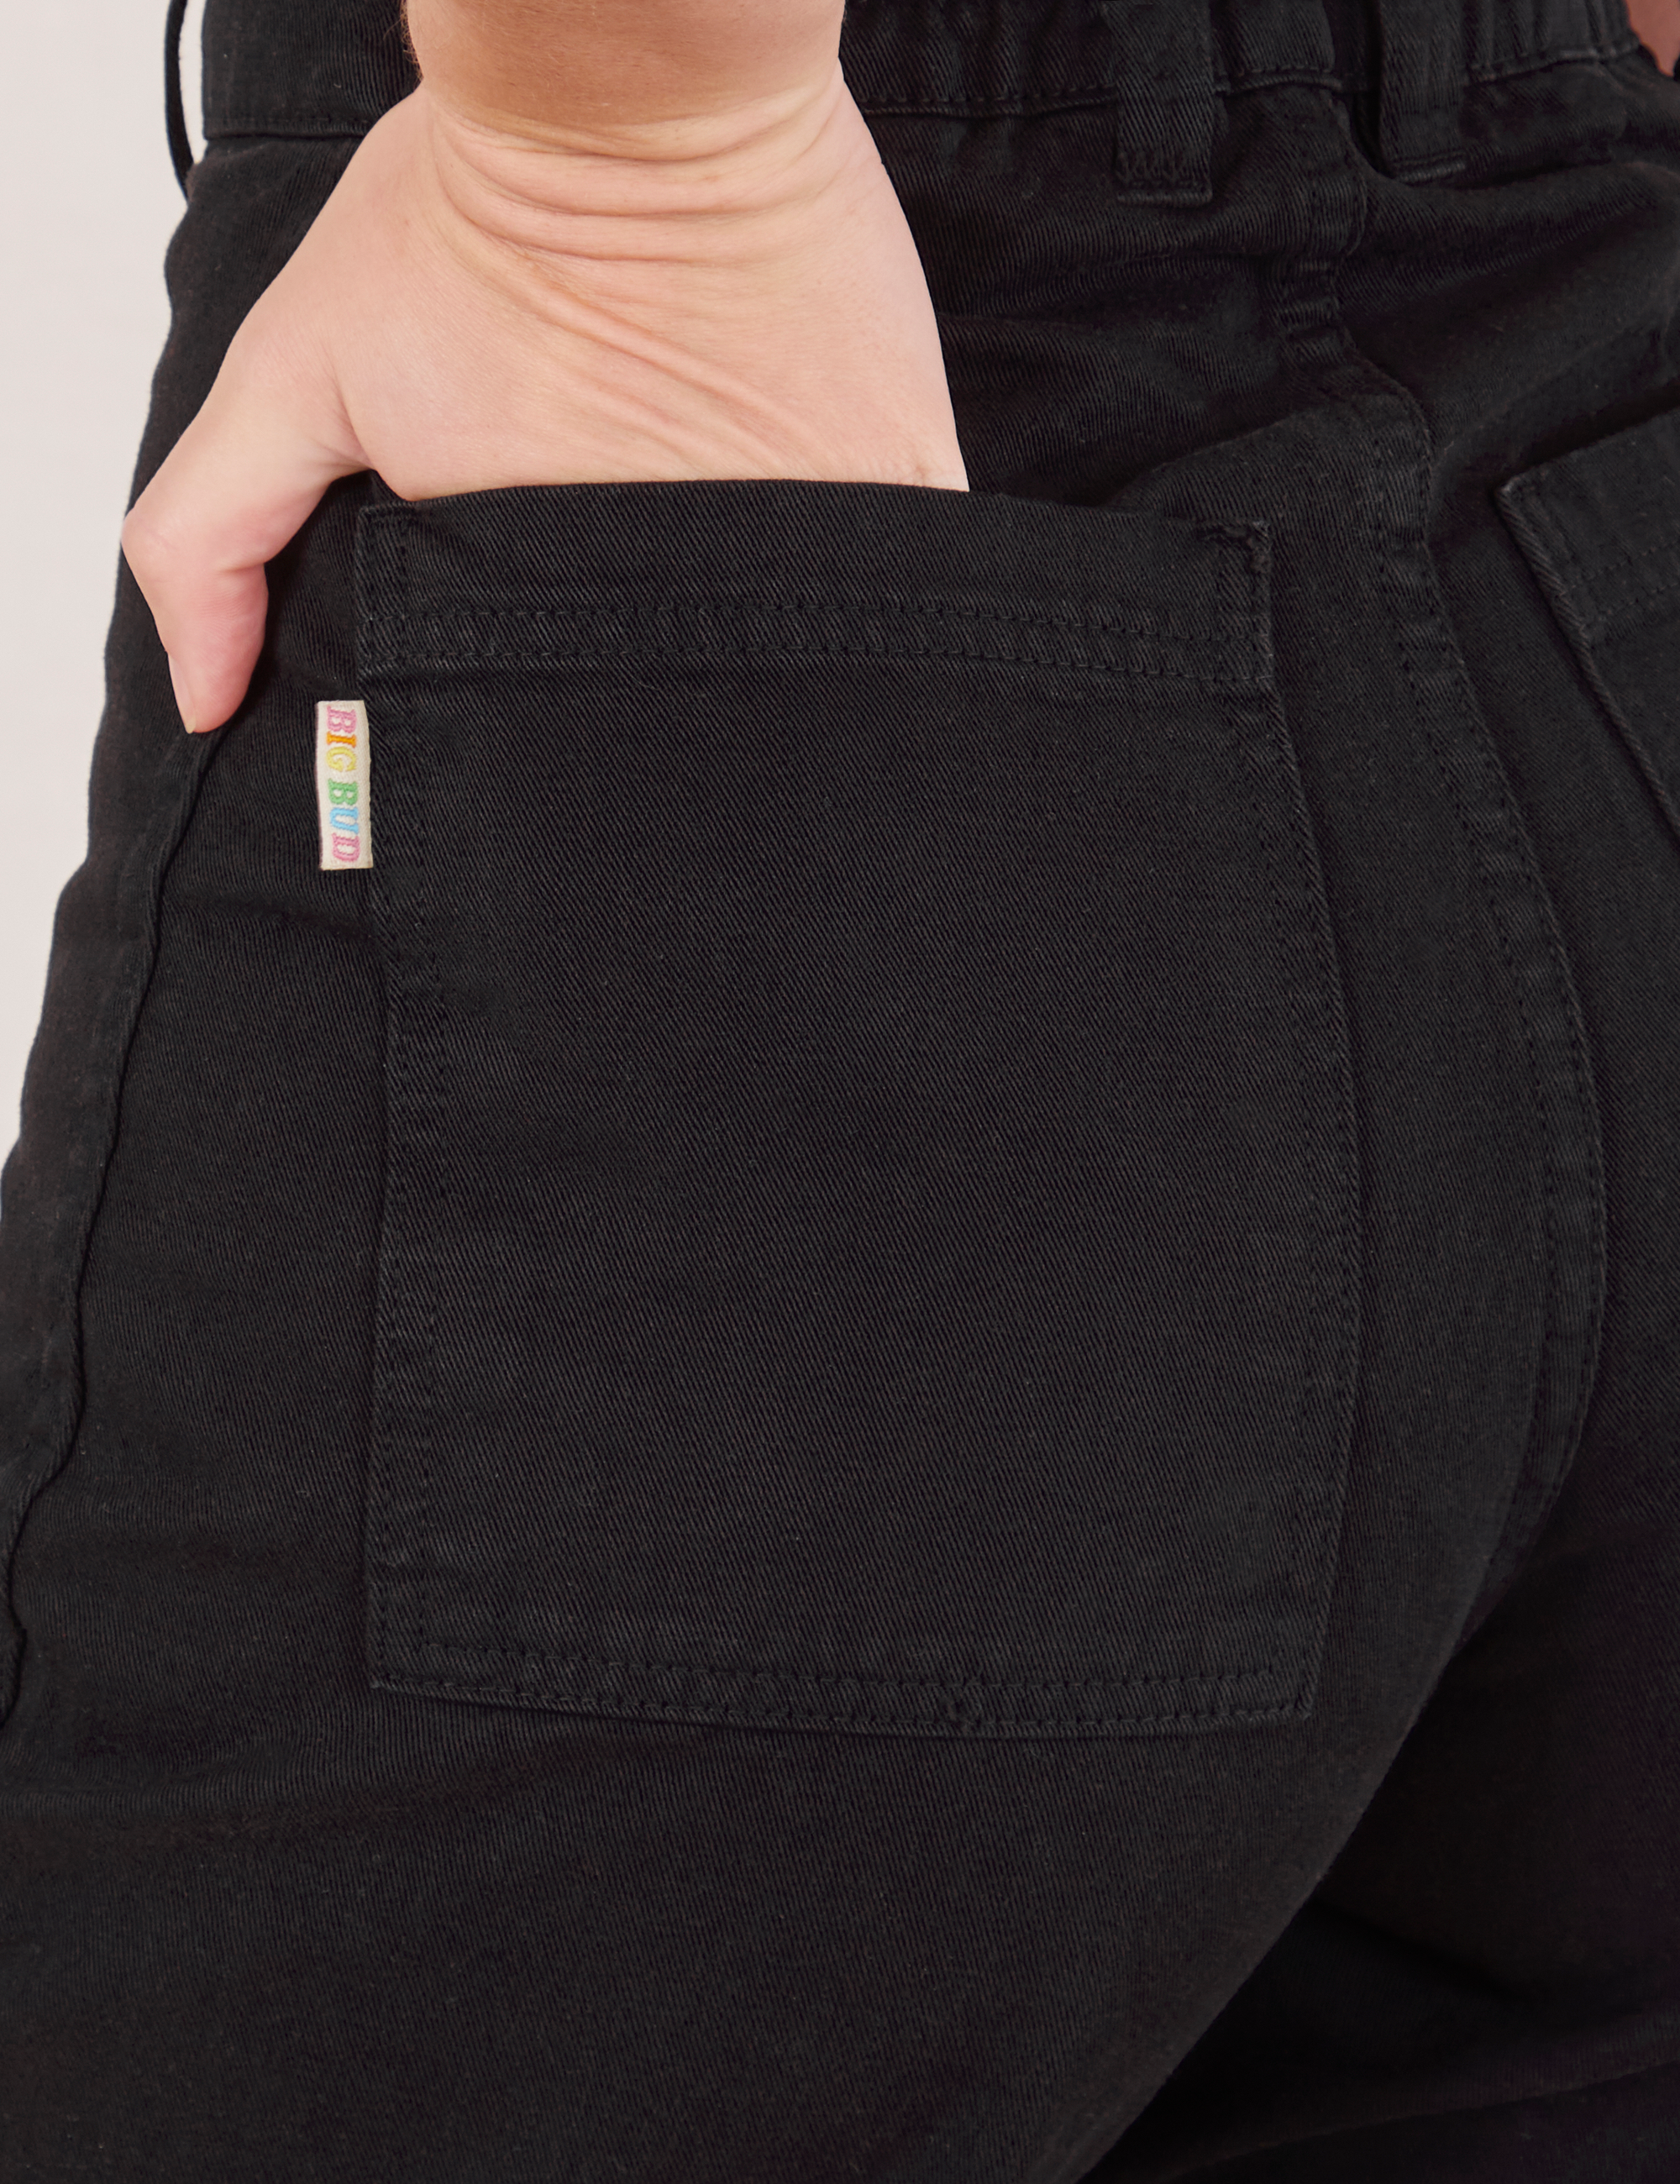 Bell Bottoms in Basic Black back pocket close up. Alex has her hand in the pocket.